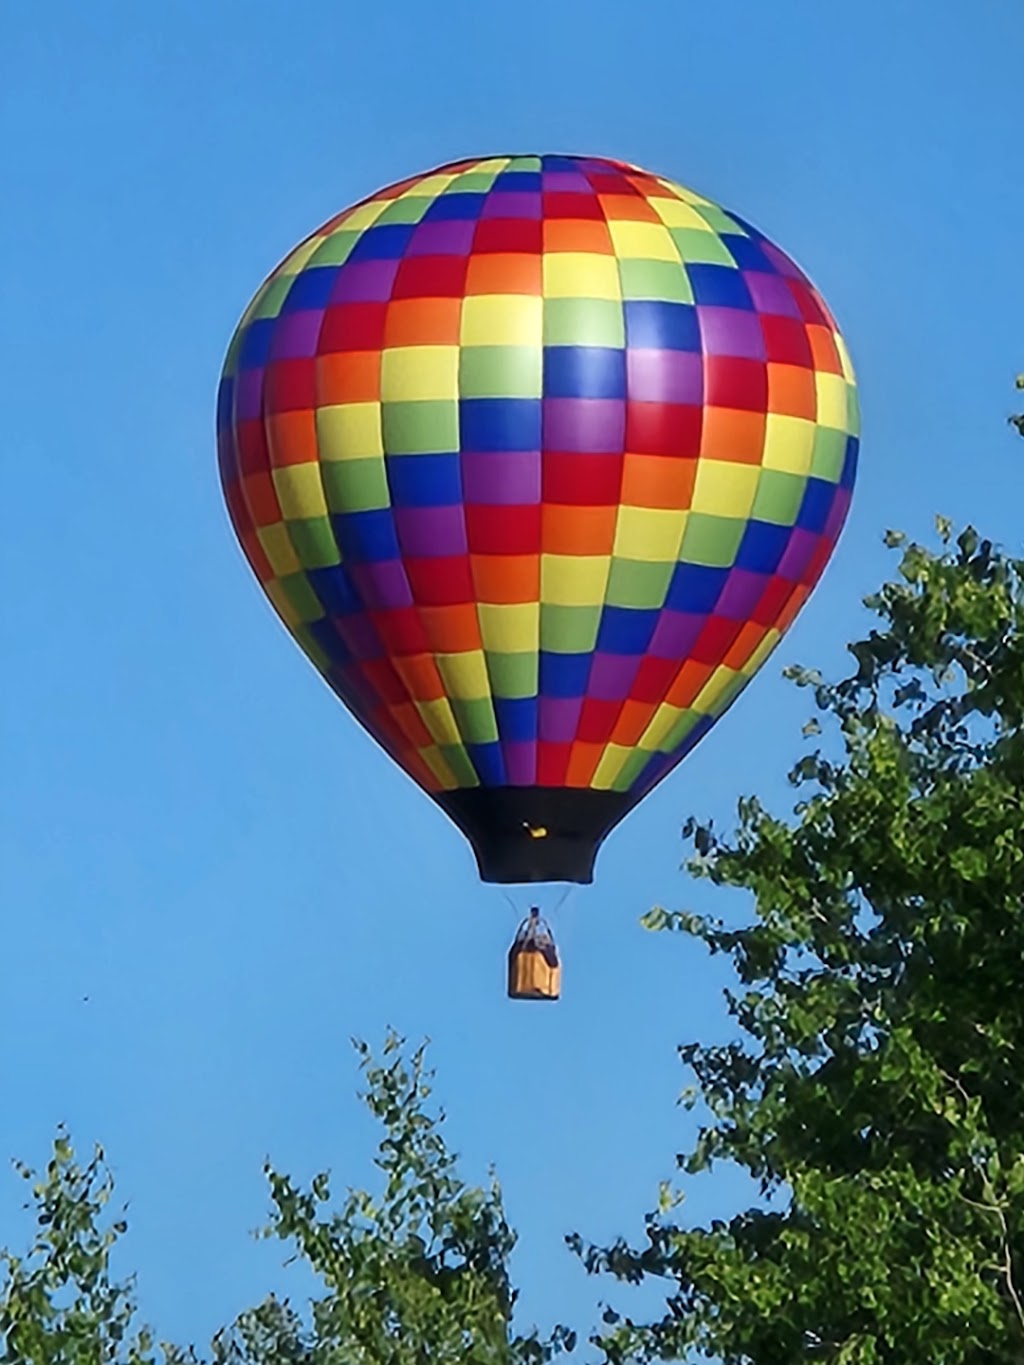 Misty River Ballooning,LLC | 82 Bliss St, Florence, MA 01062 | Phone: (413) 387-5658